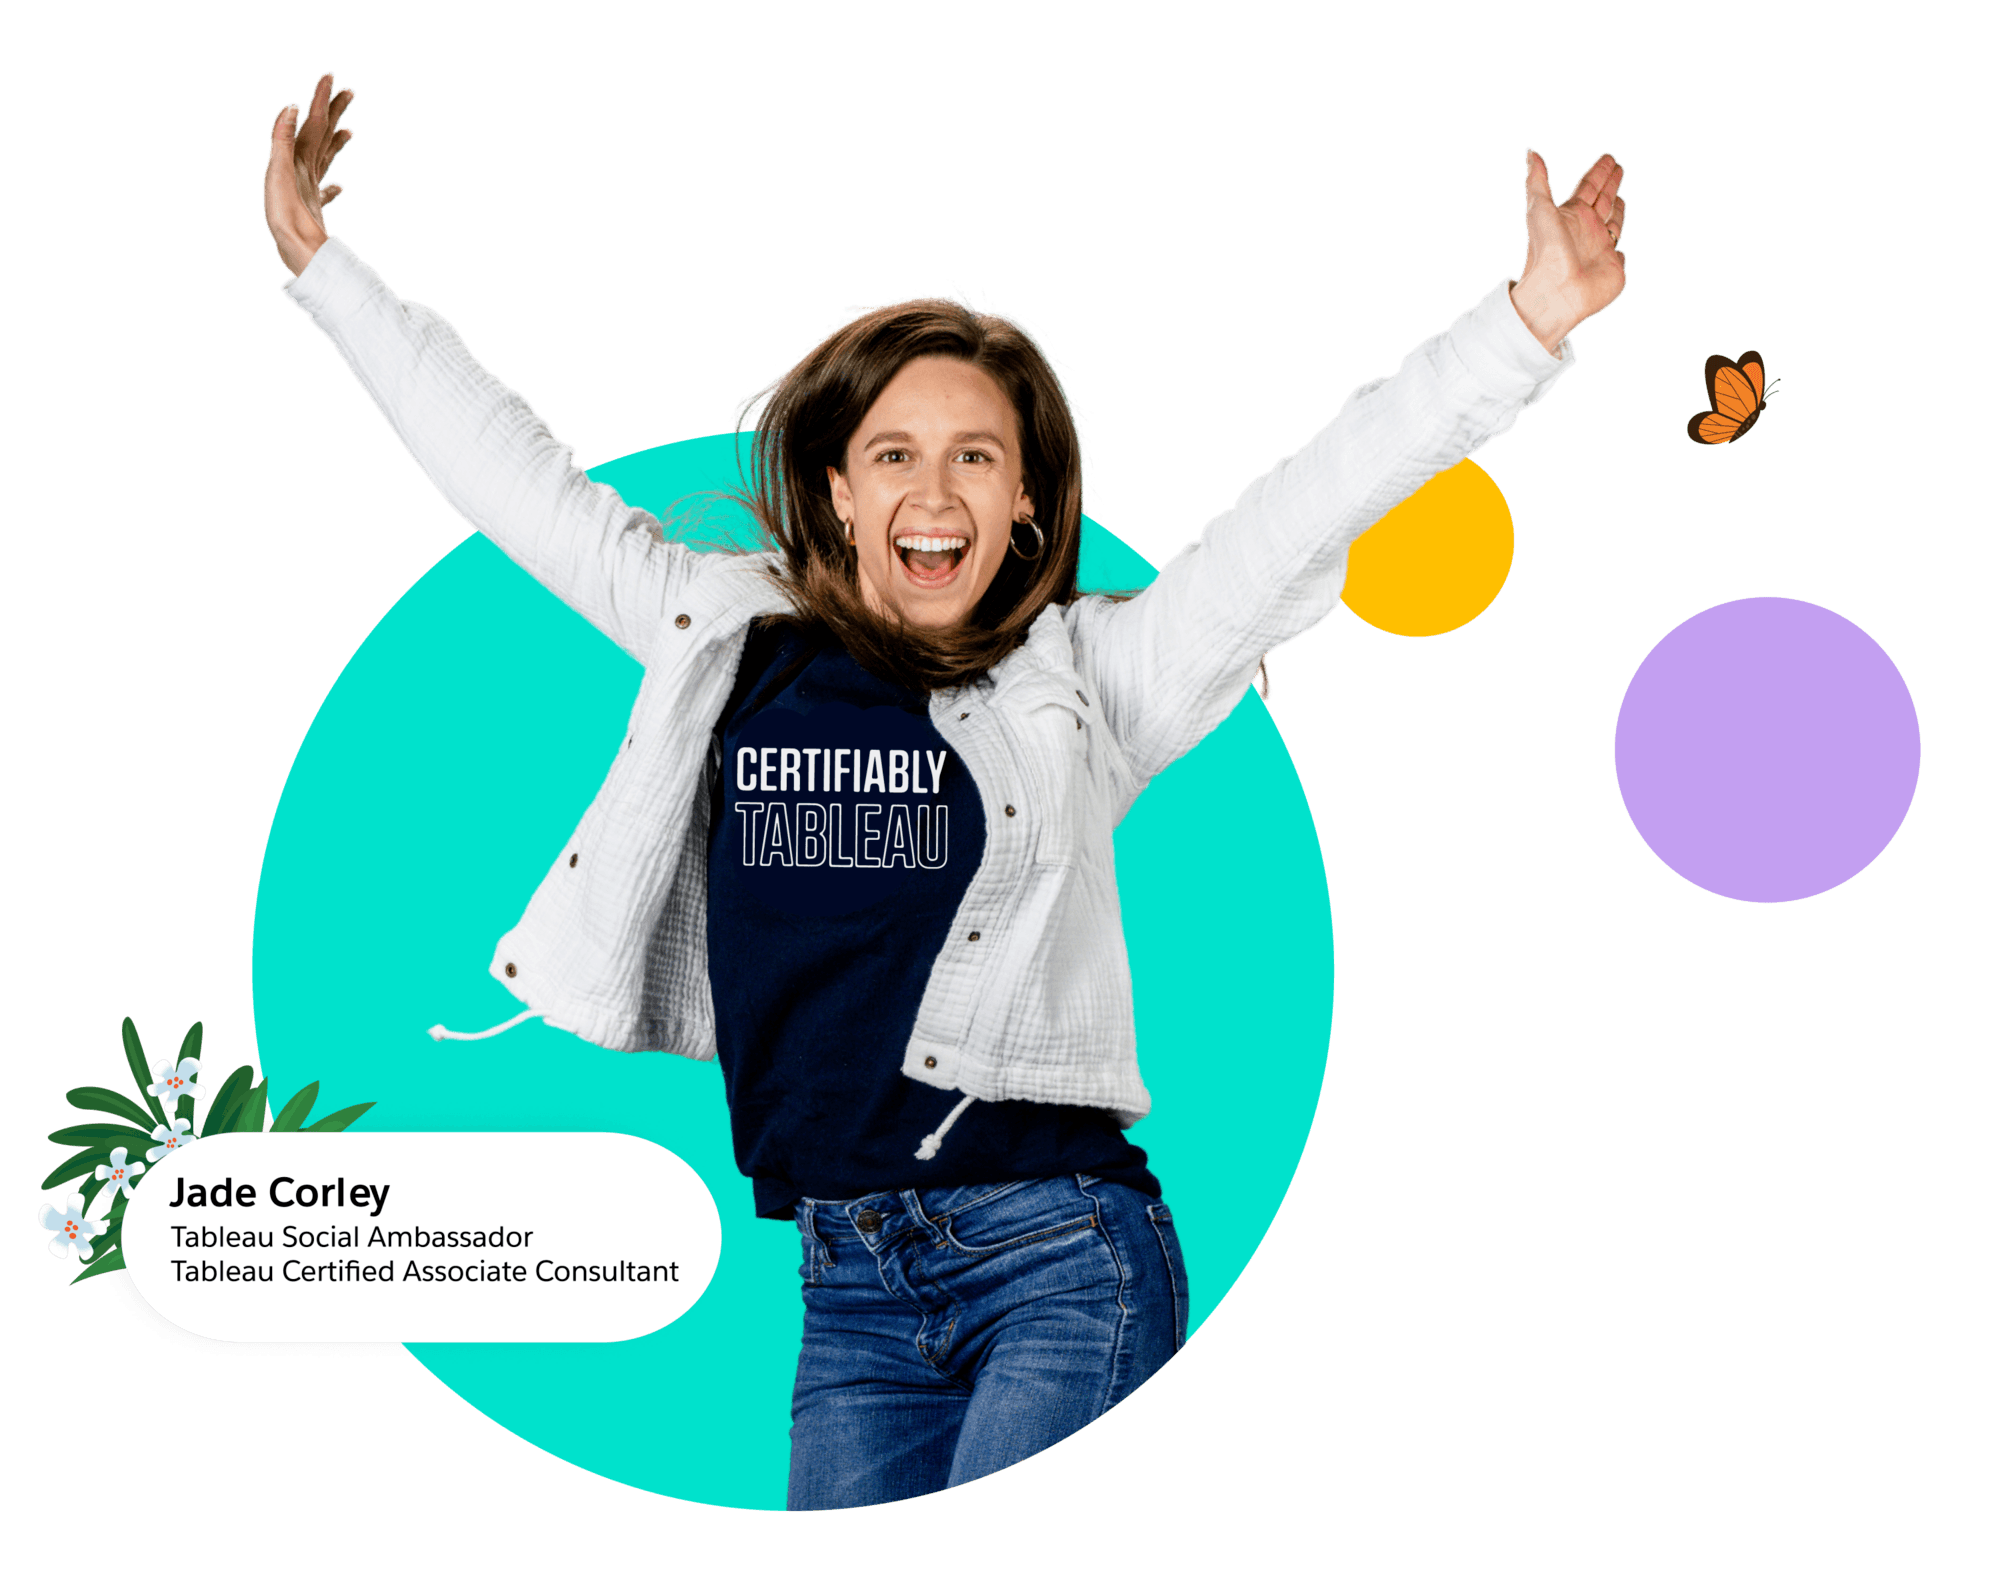 Tableau Social Ambassador Jade Corley jumping and smiling wearing a Certifiably Tableau shirt with bright colored bubble images